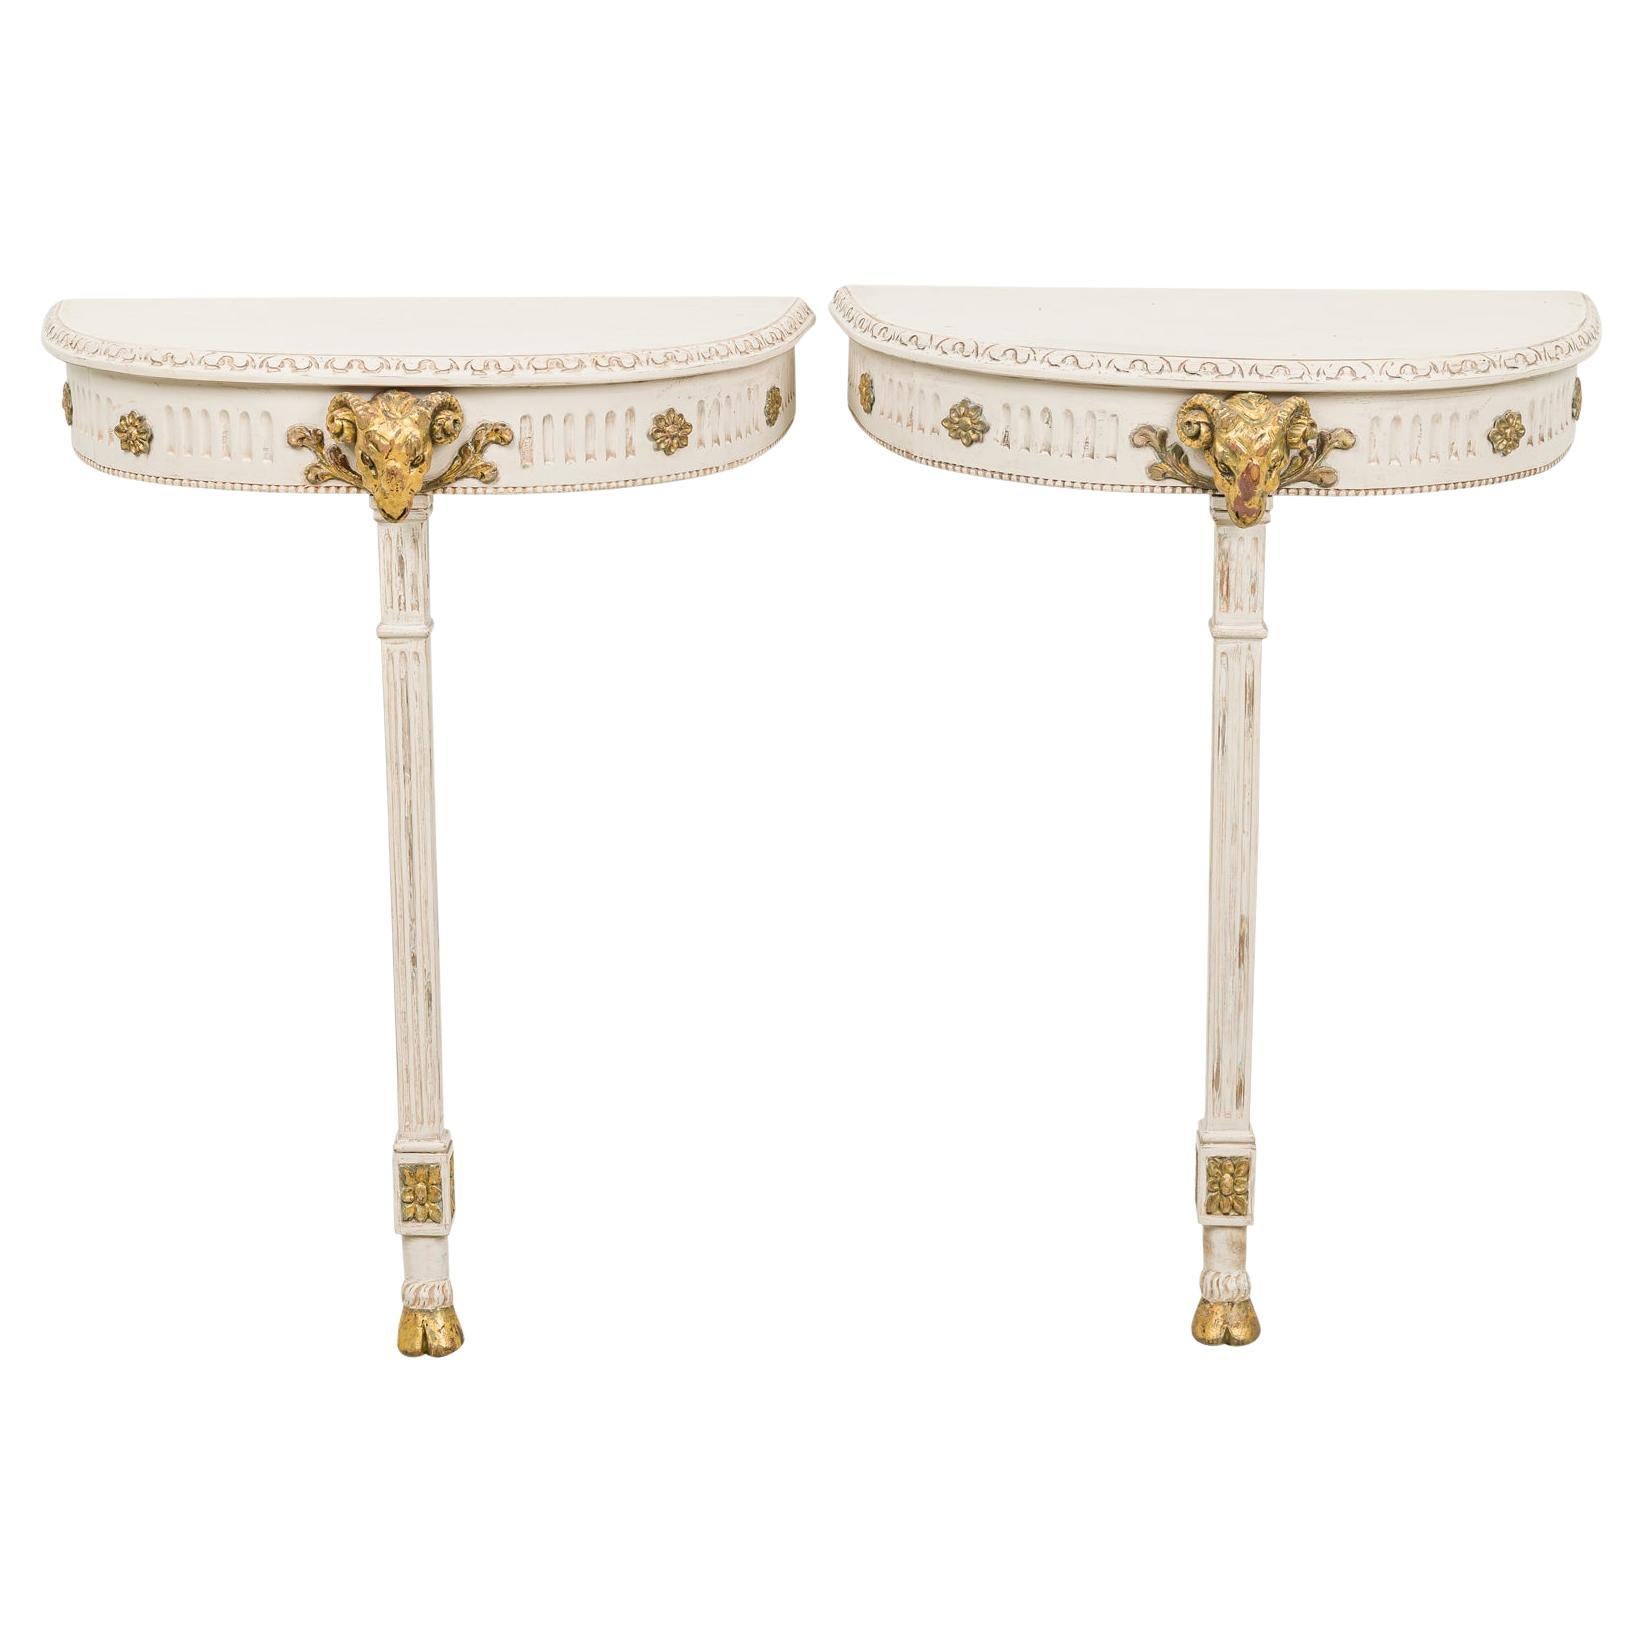 Pair of Swedish Neo-Classic Cream Painted and Gilt Demilune Wall-Mounted Console For Sale